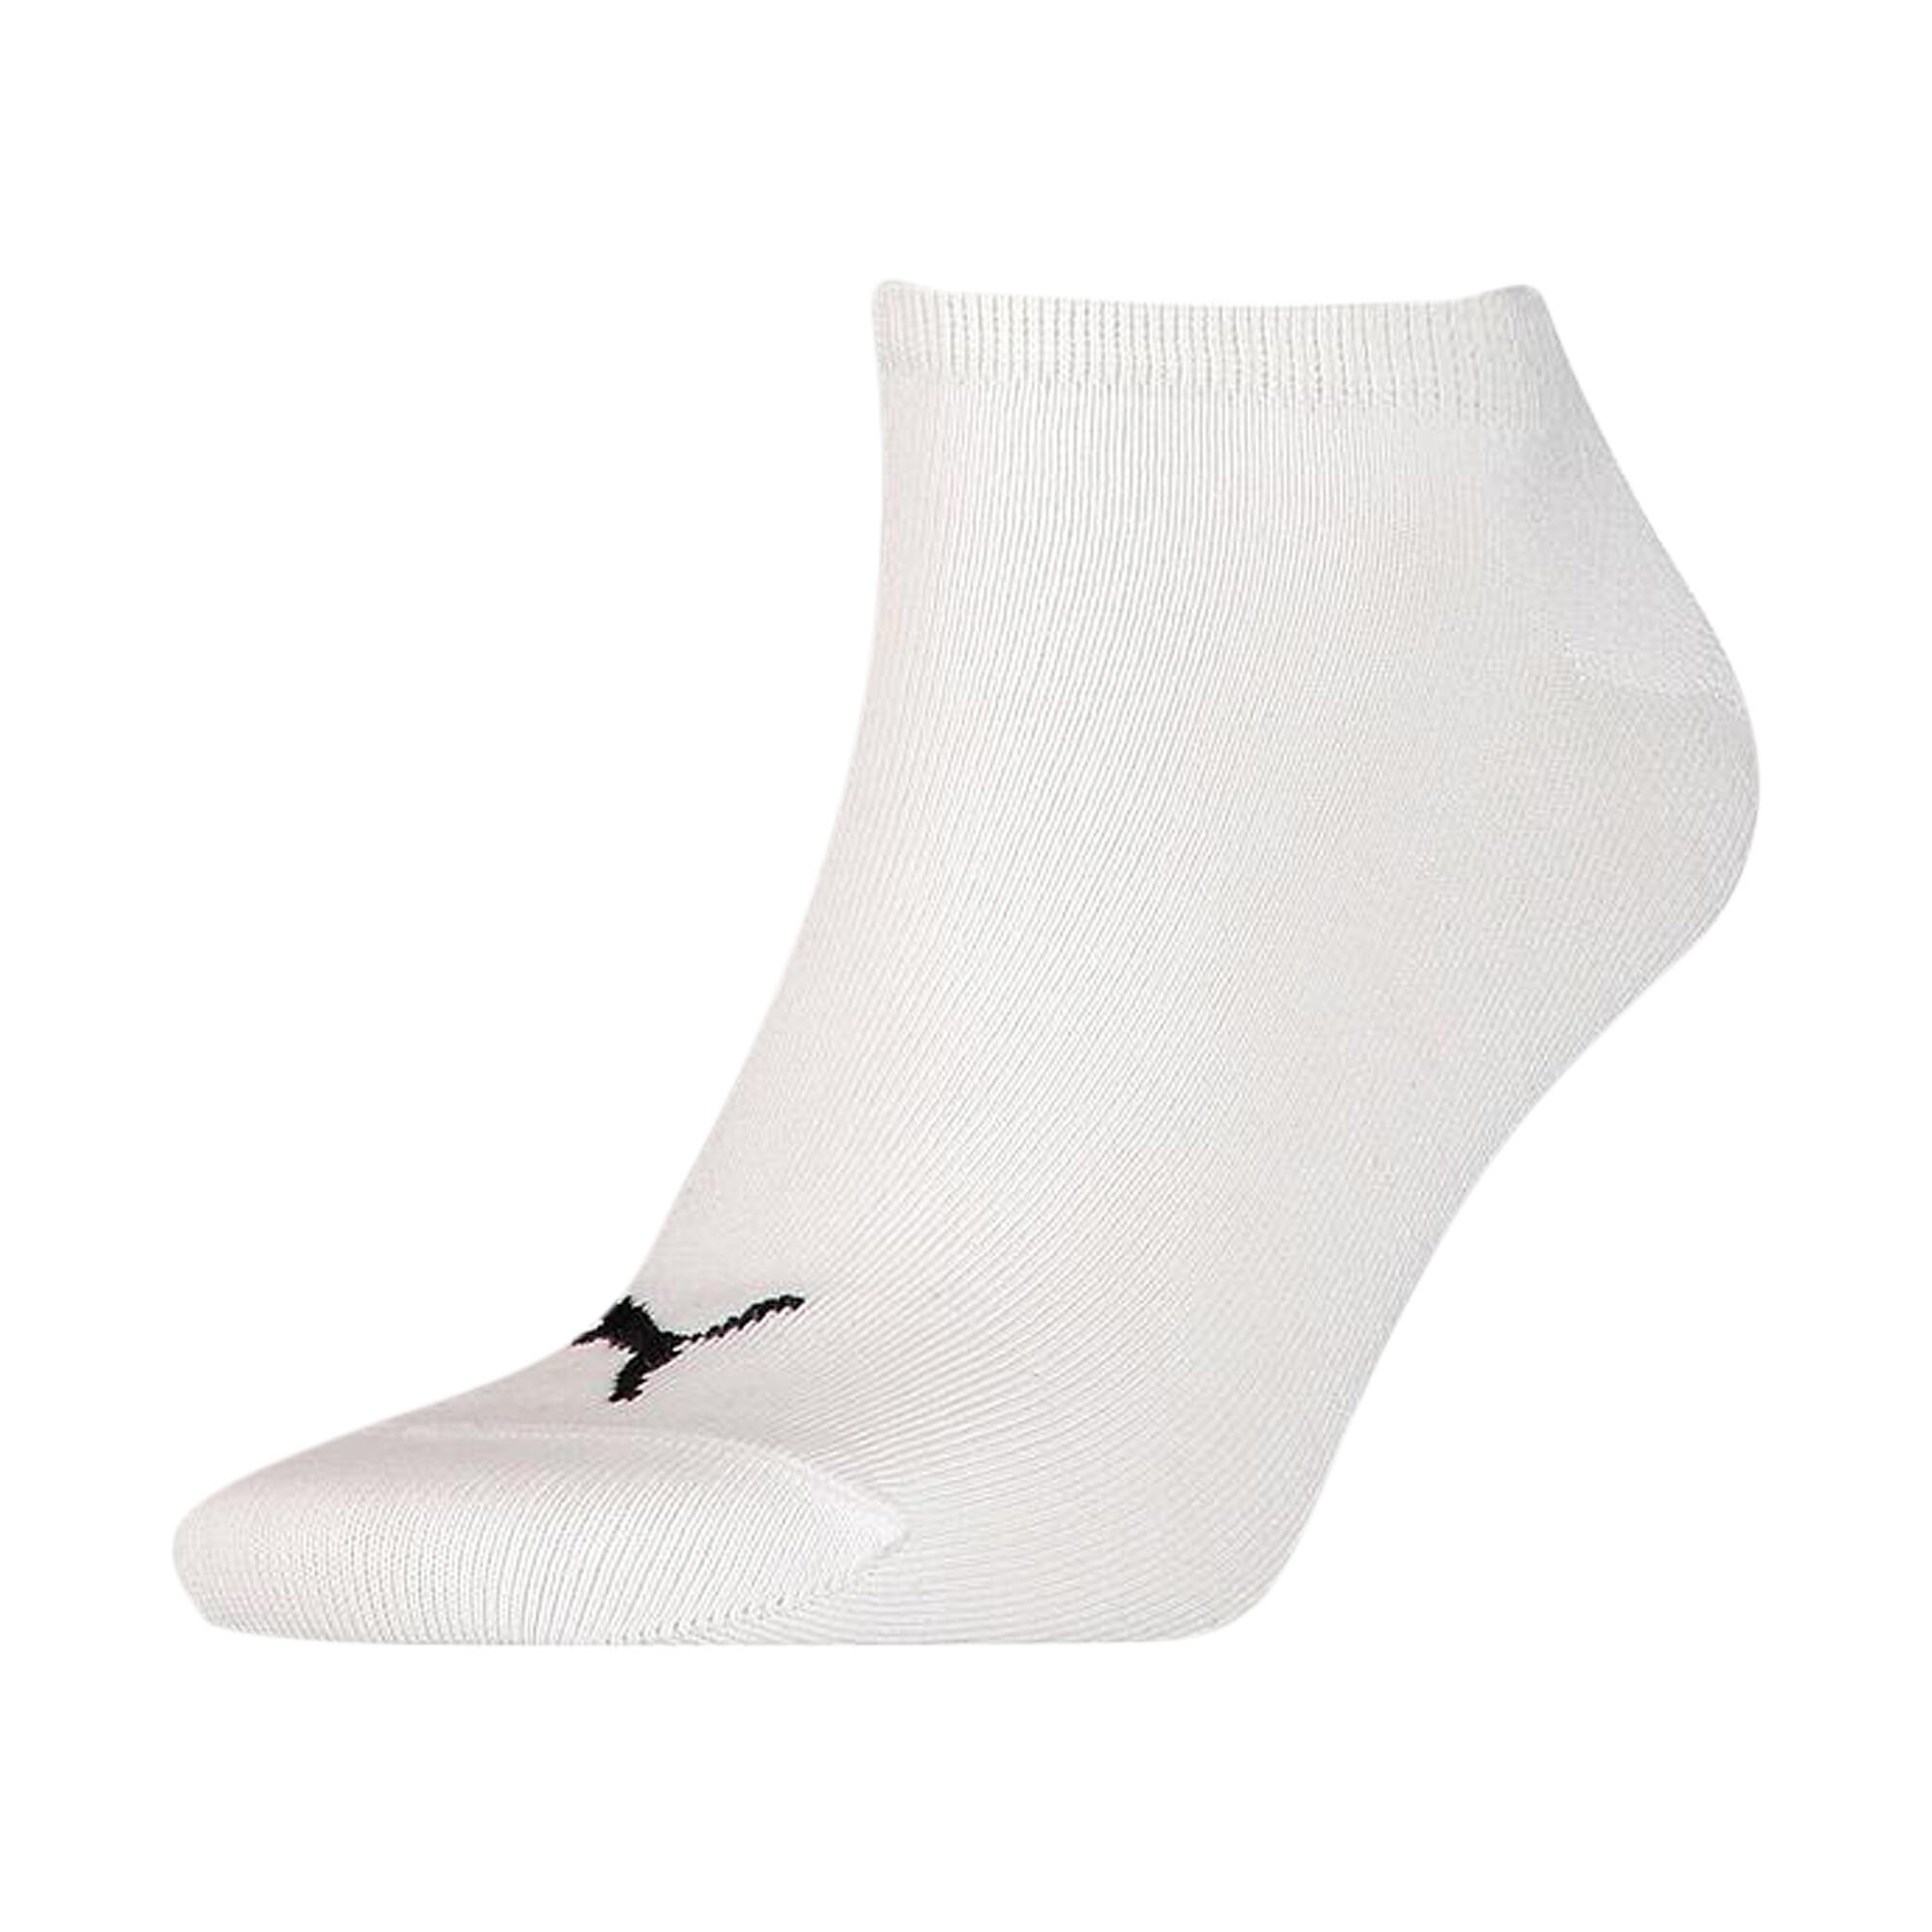 Unisex Adult Invisible Socks (Pack of 3) (White) 1/3